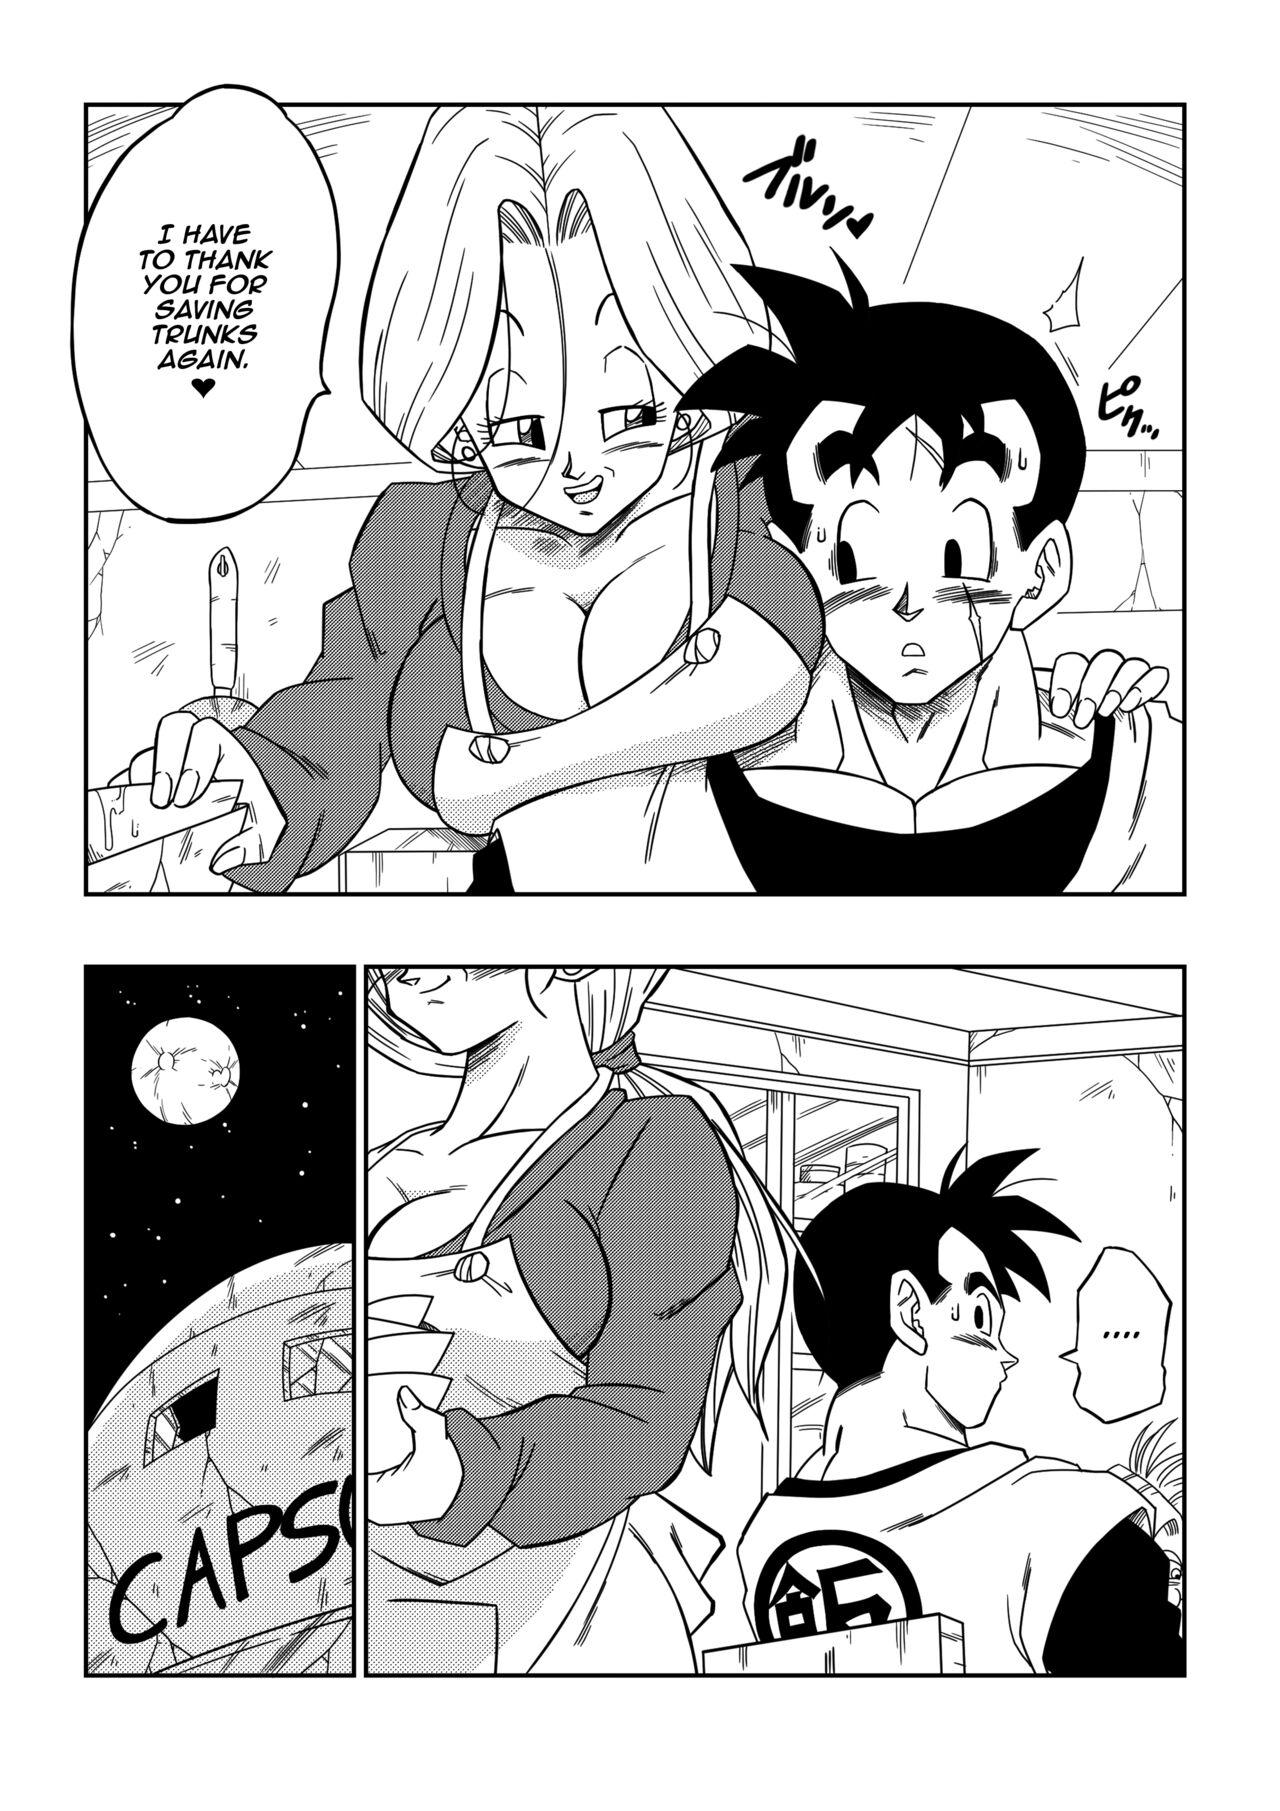 Lost of sex in this Future! - BULMA and GOHAN 3